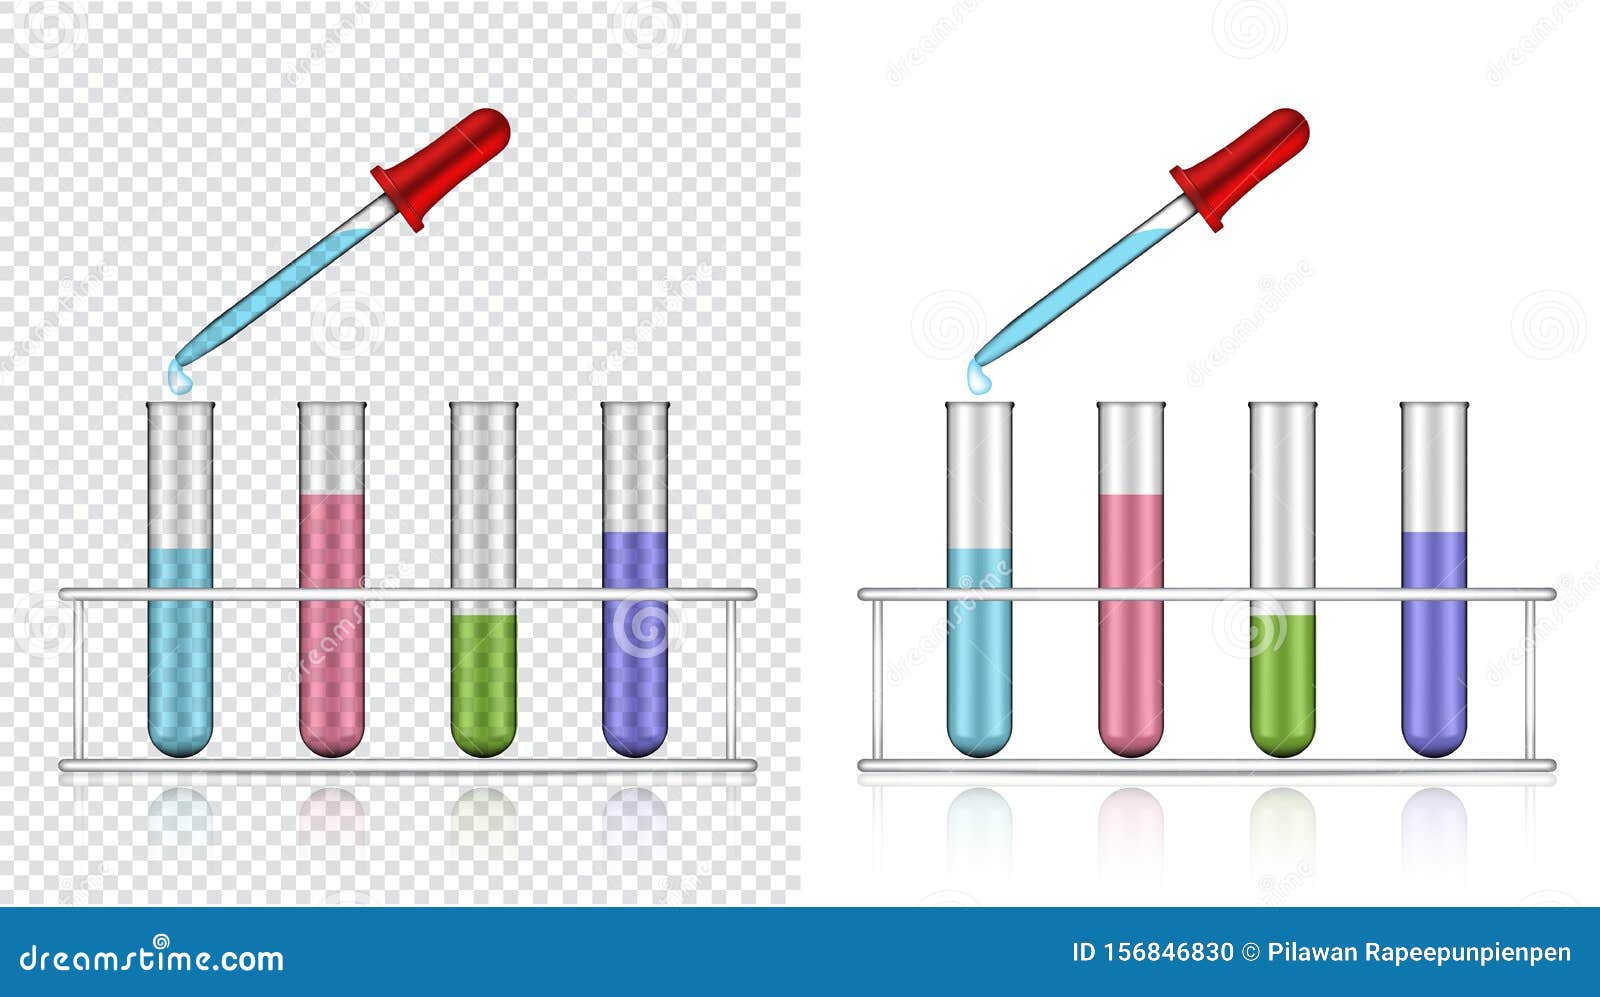 Download Dropper Mock Up Realistic Transparent Test Tube Plastic Or Glass For Science And Learning ...